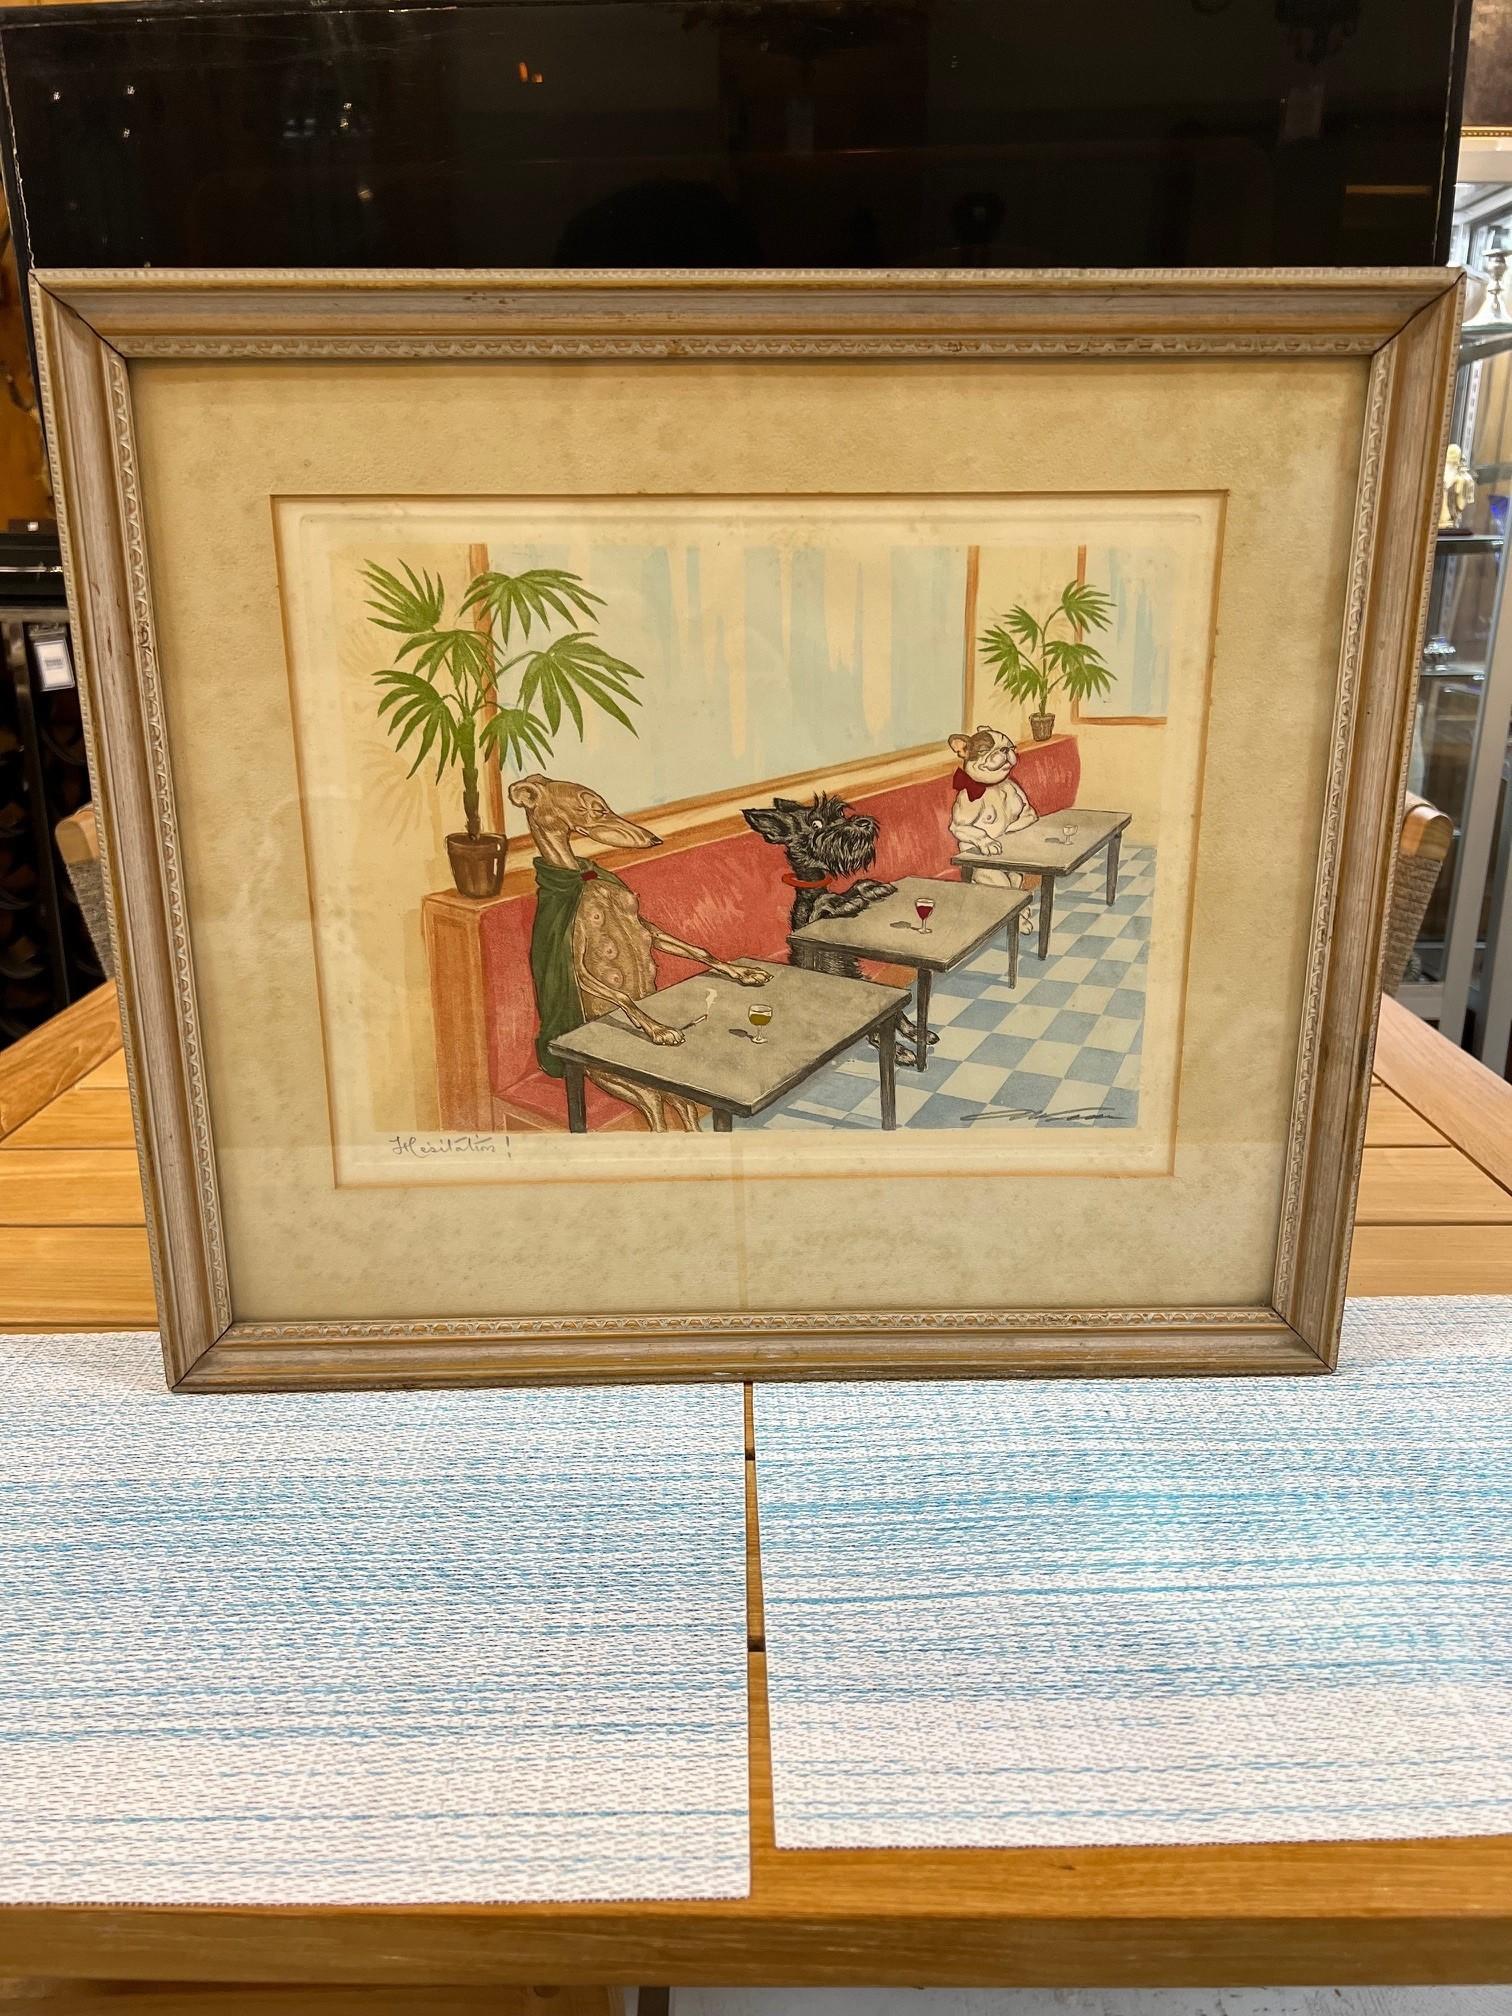 Original Mid 20th Century signed Boris O'Klein Dirty Dogs of Paris Hesitation, a hand colored etching of three dogs sitting in a french cafe. The male dog is sitting between two female dogs in a amusing situation. Signed by the artist Boris O'Klein